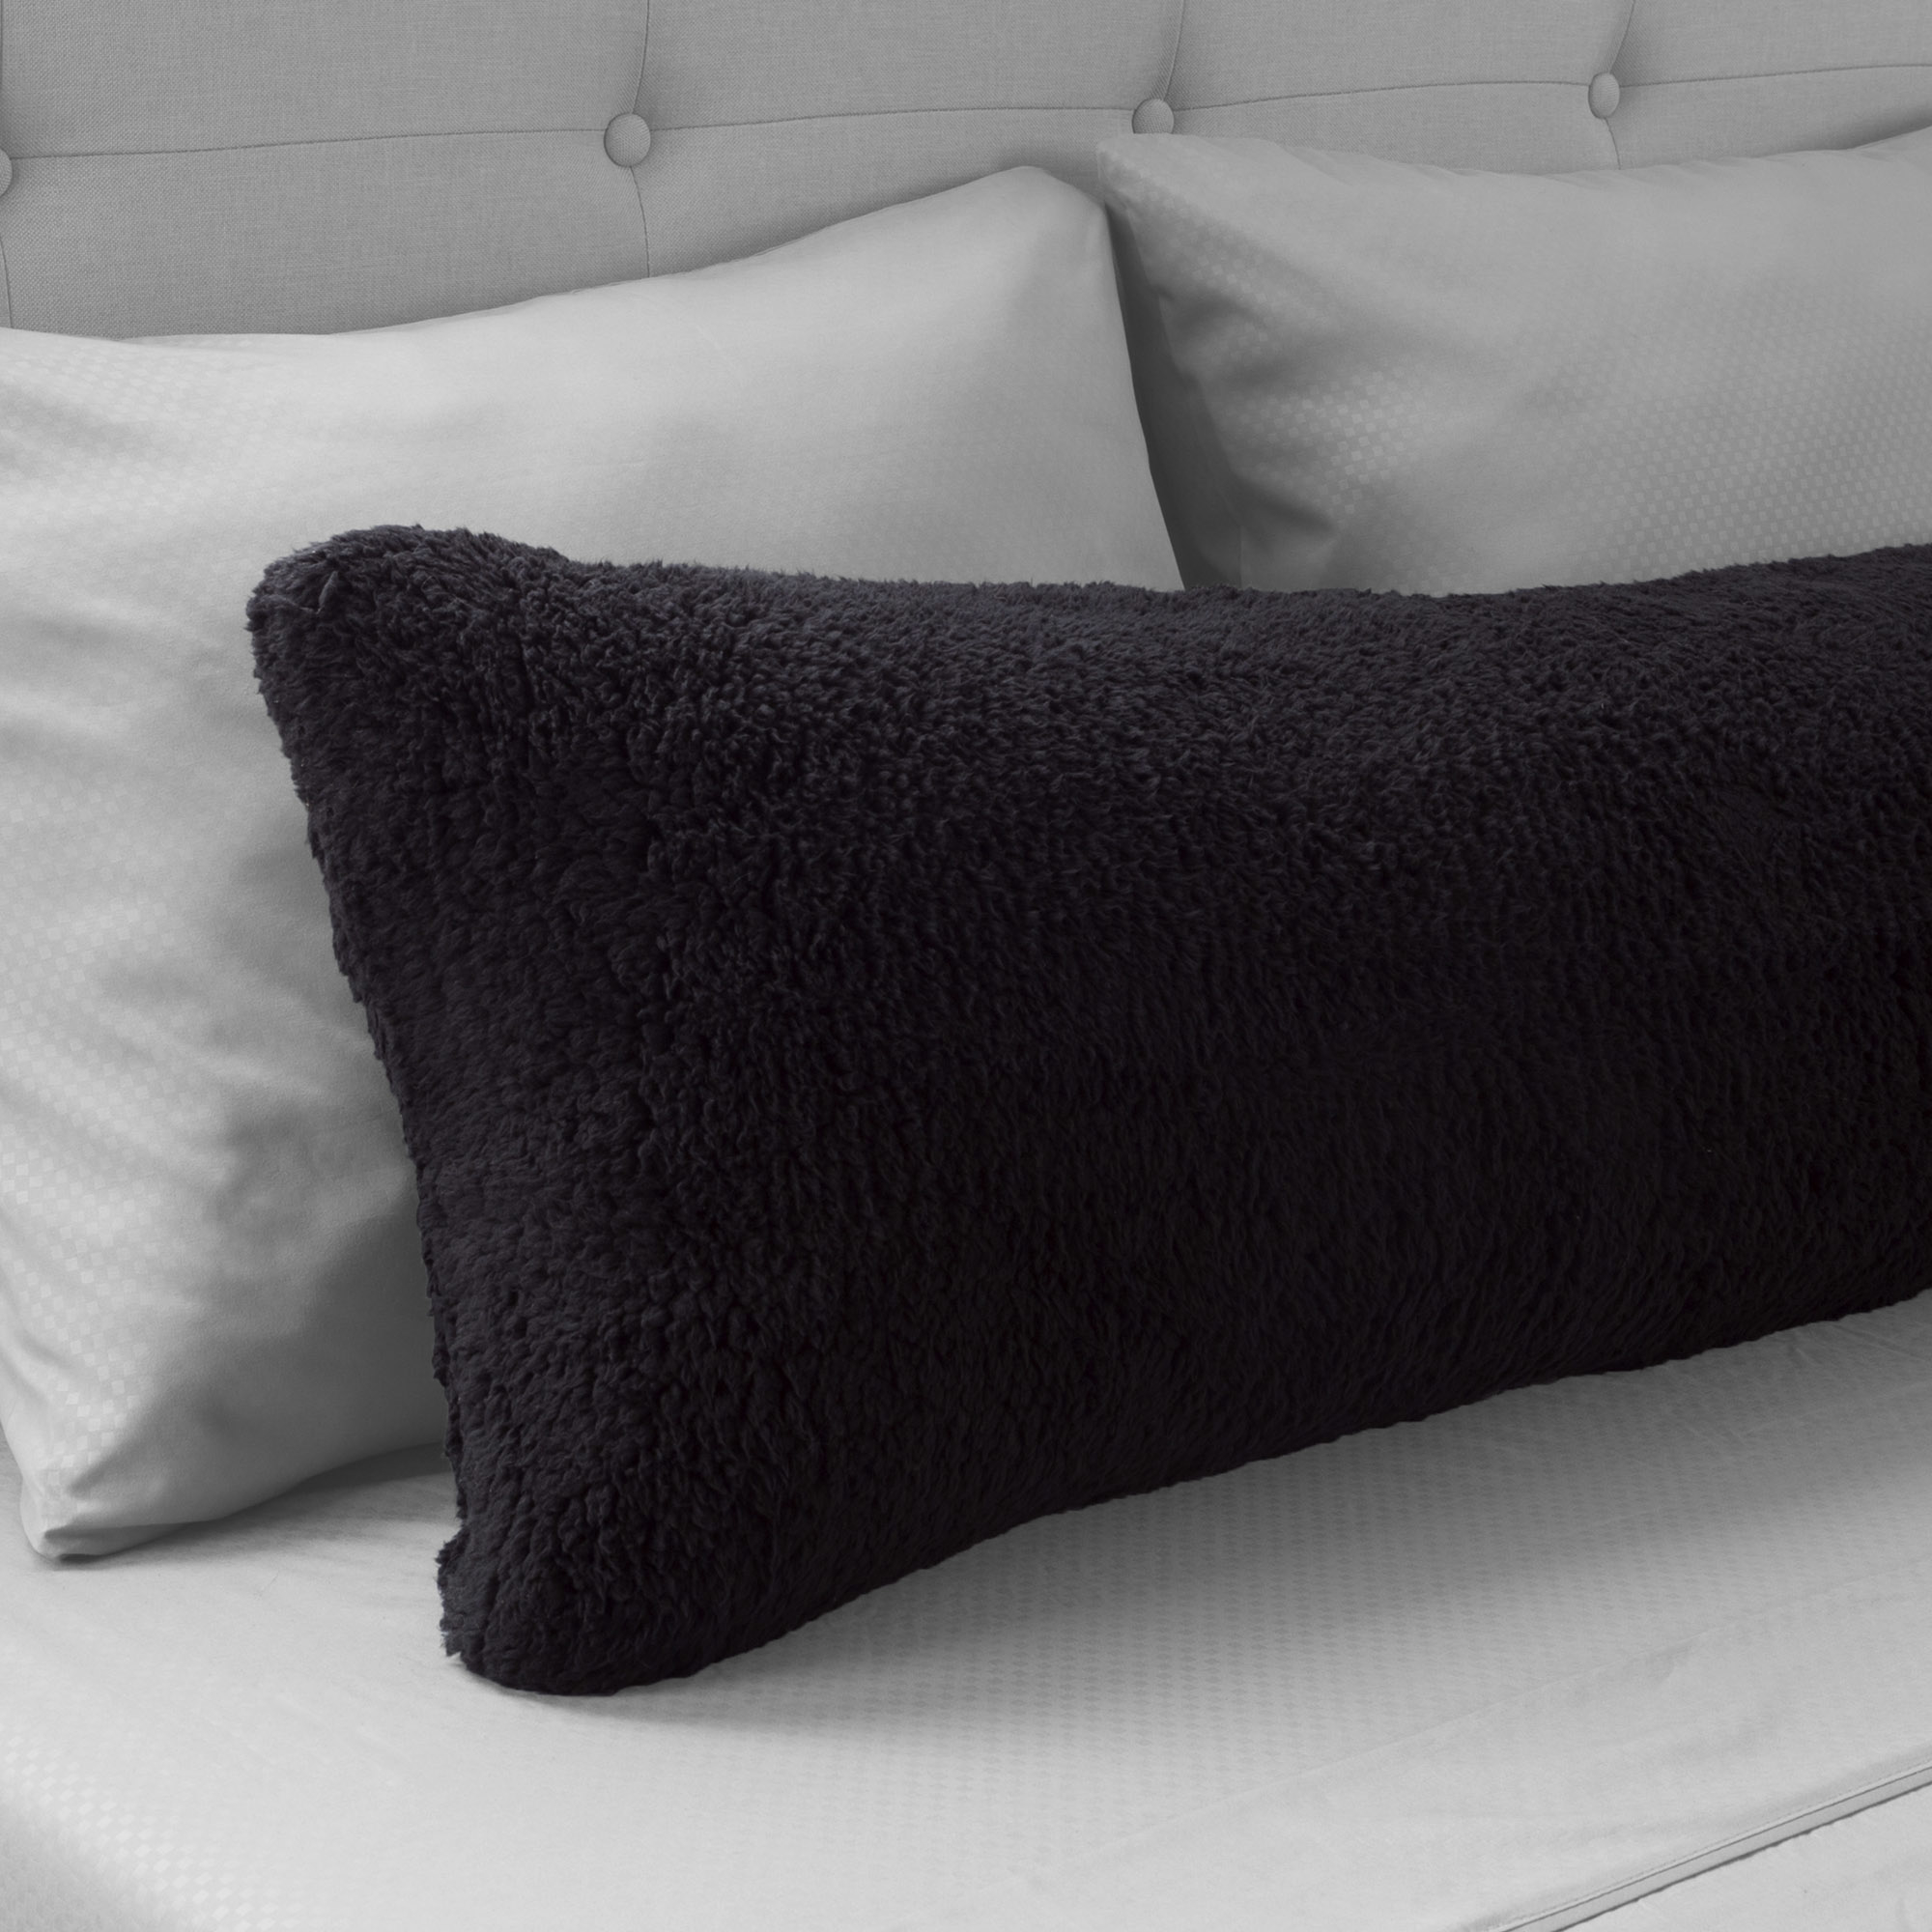 Warm Body Pillow Cover Soft Comfy Pillow Case Zippered Washable 52 X 18 Inches Black